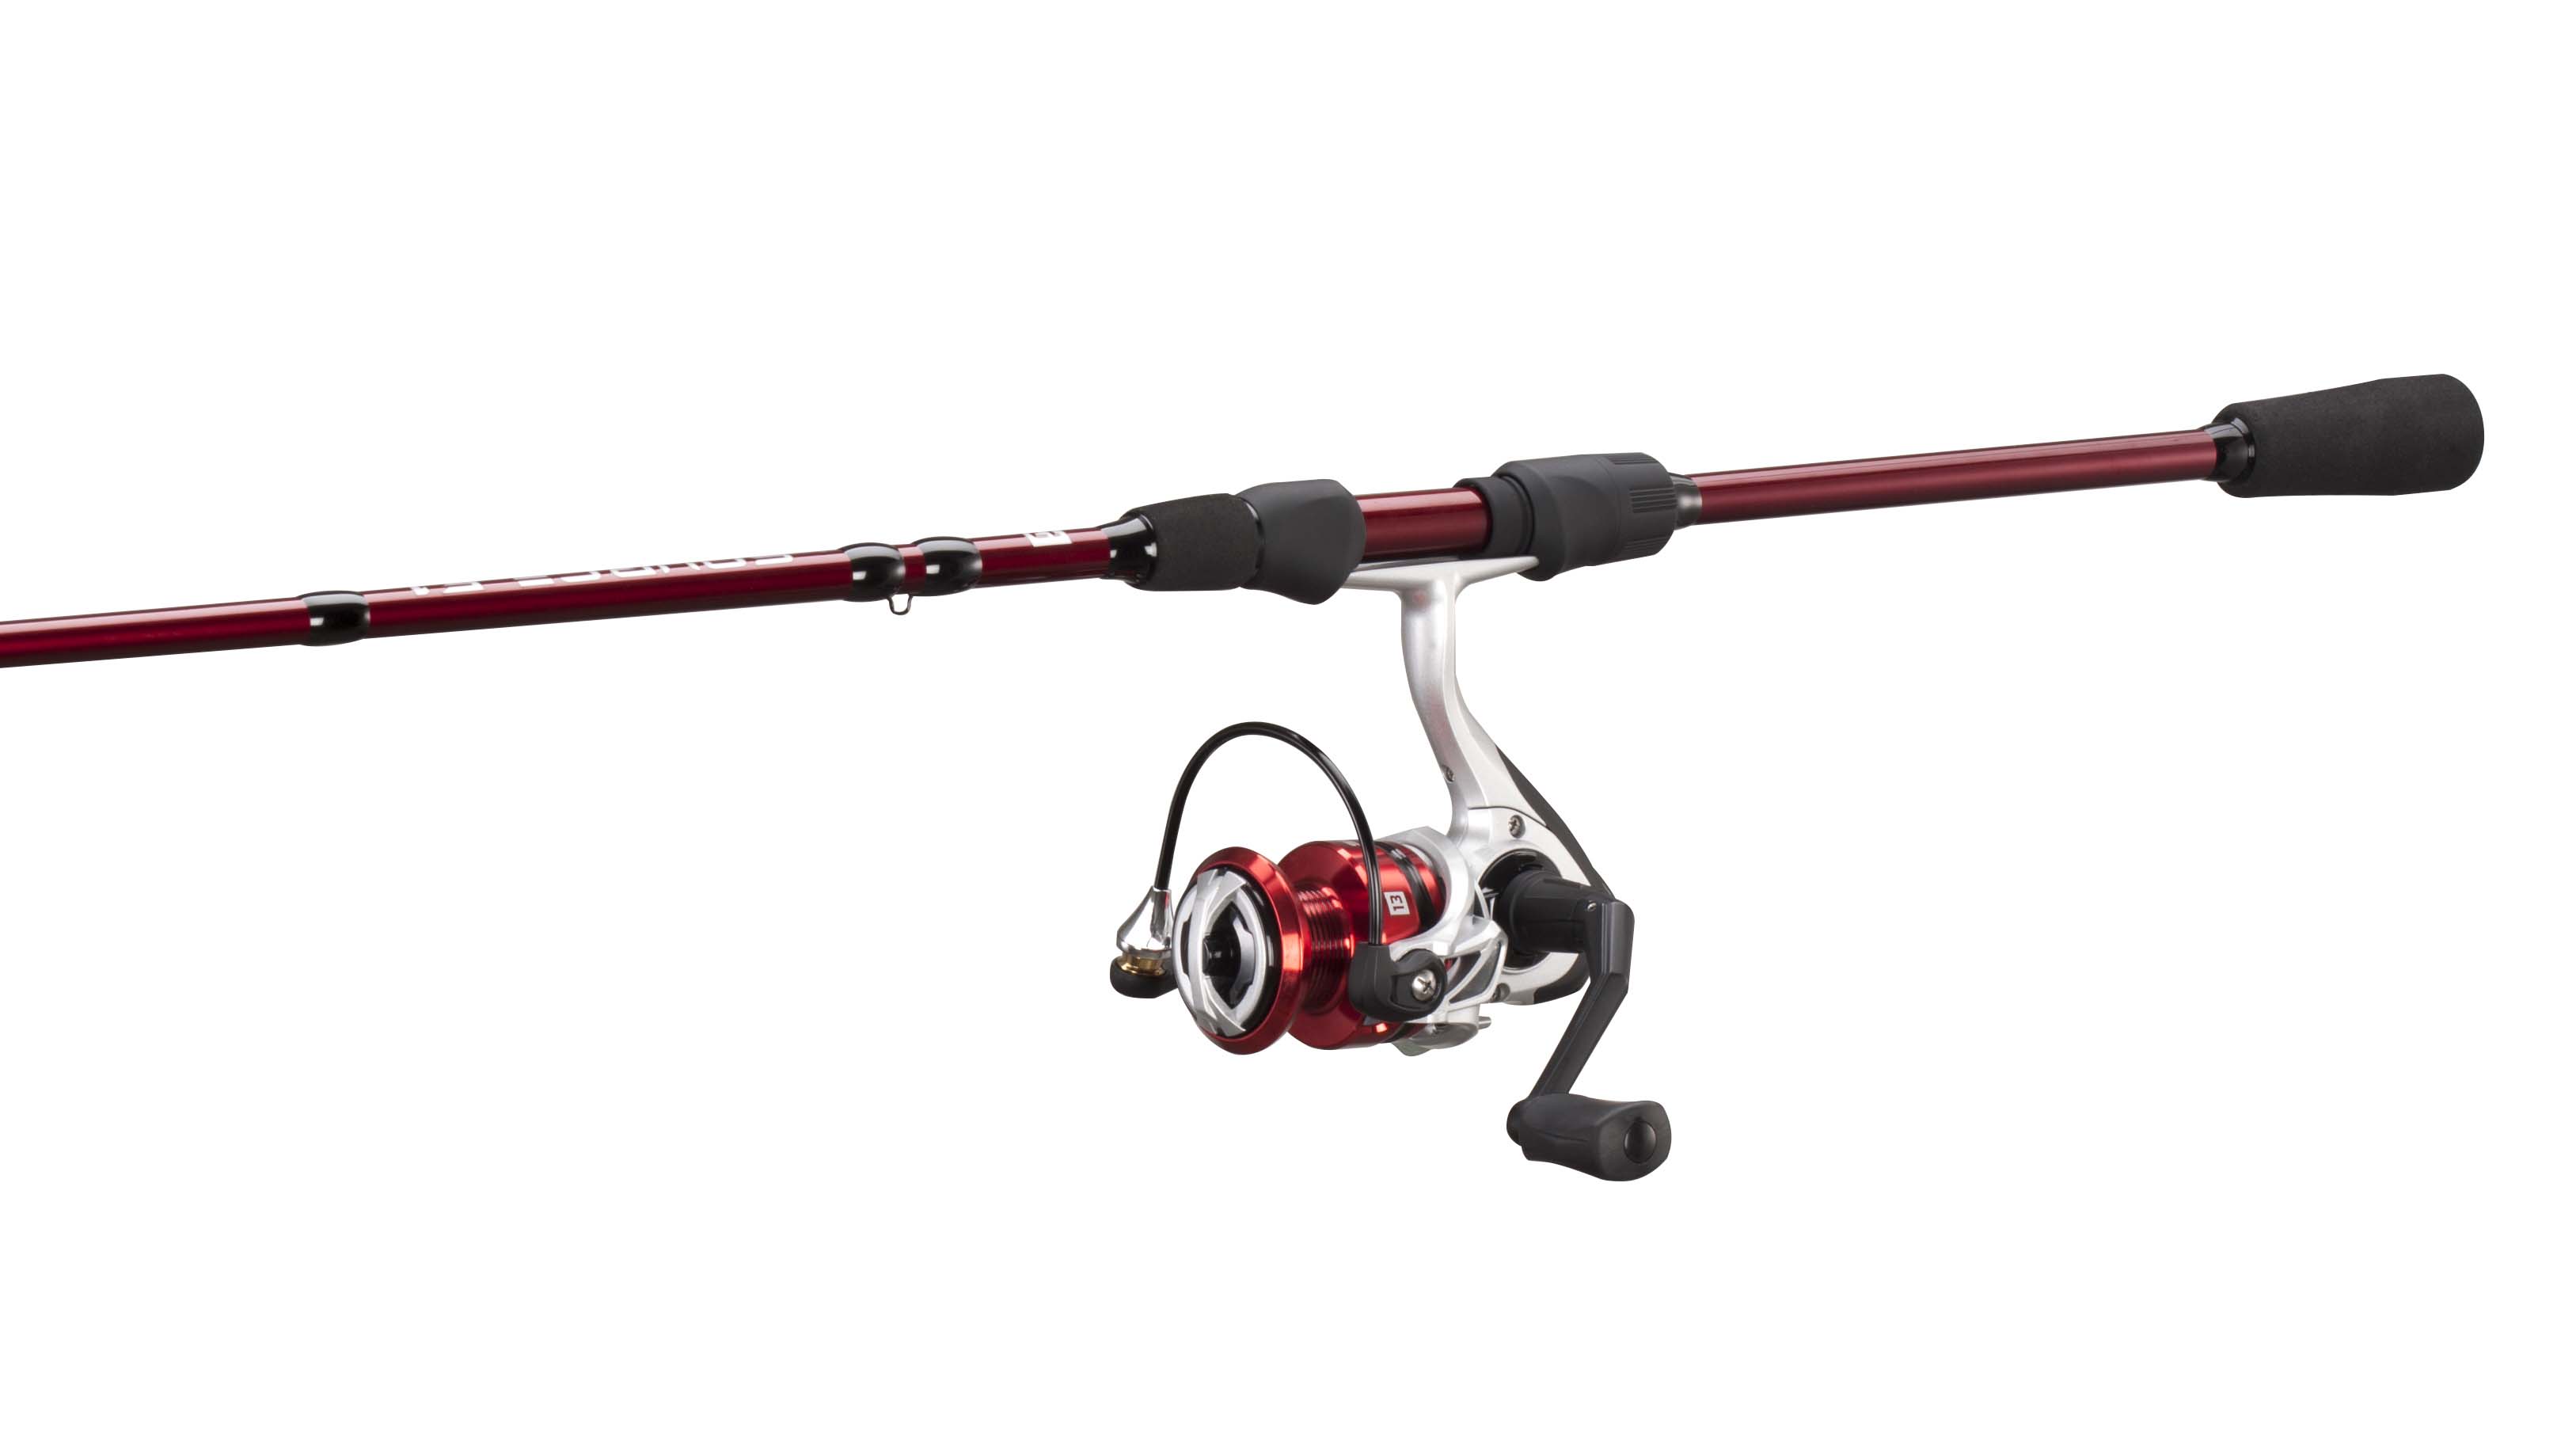 13 Fishing Source F1 Spinning Combo 3000 Size Reel, Fast Action, Fresh  SORF1-SC71M , $4.00 Off with Free S&H — CampSaver